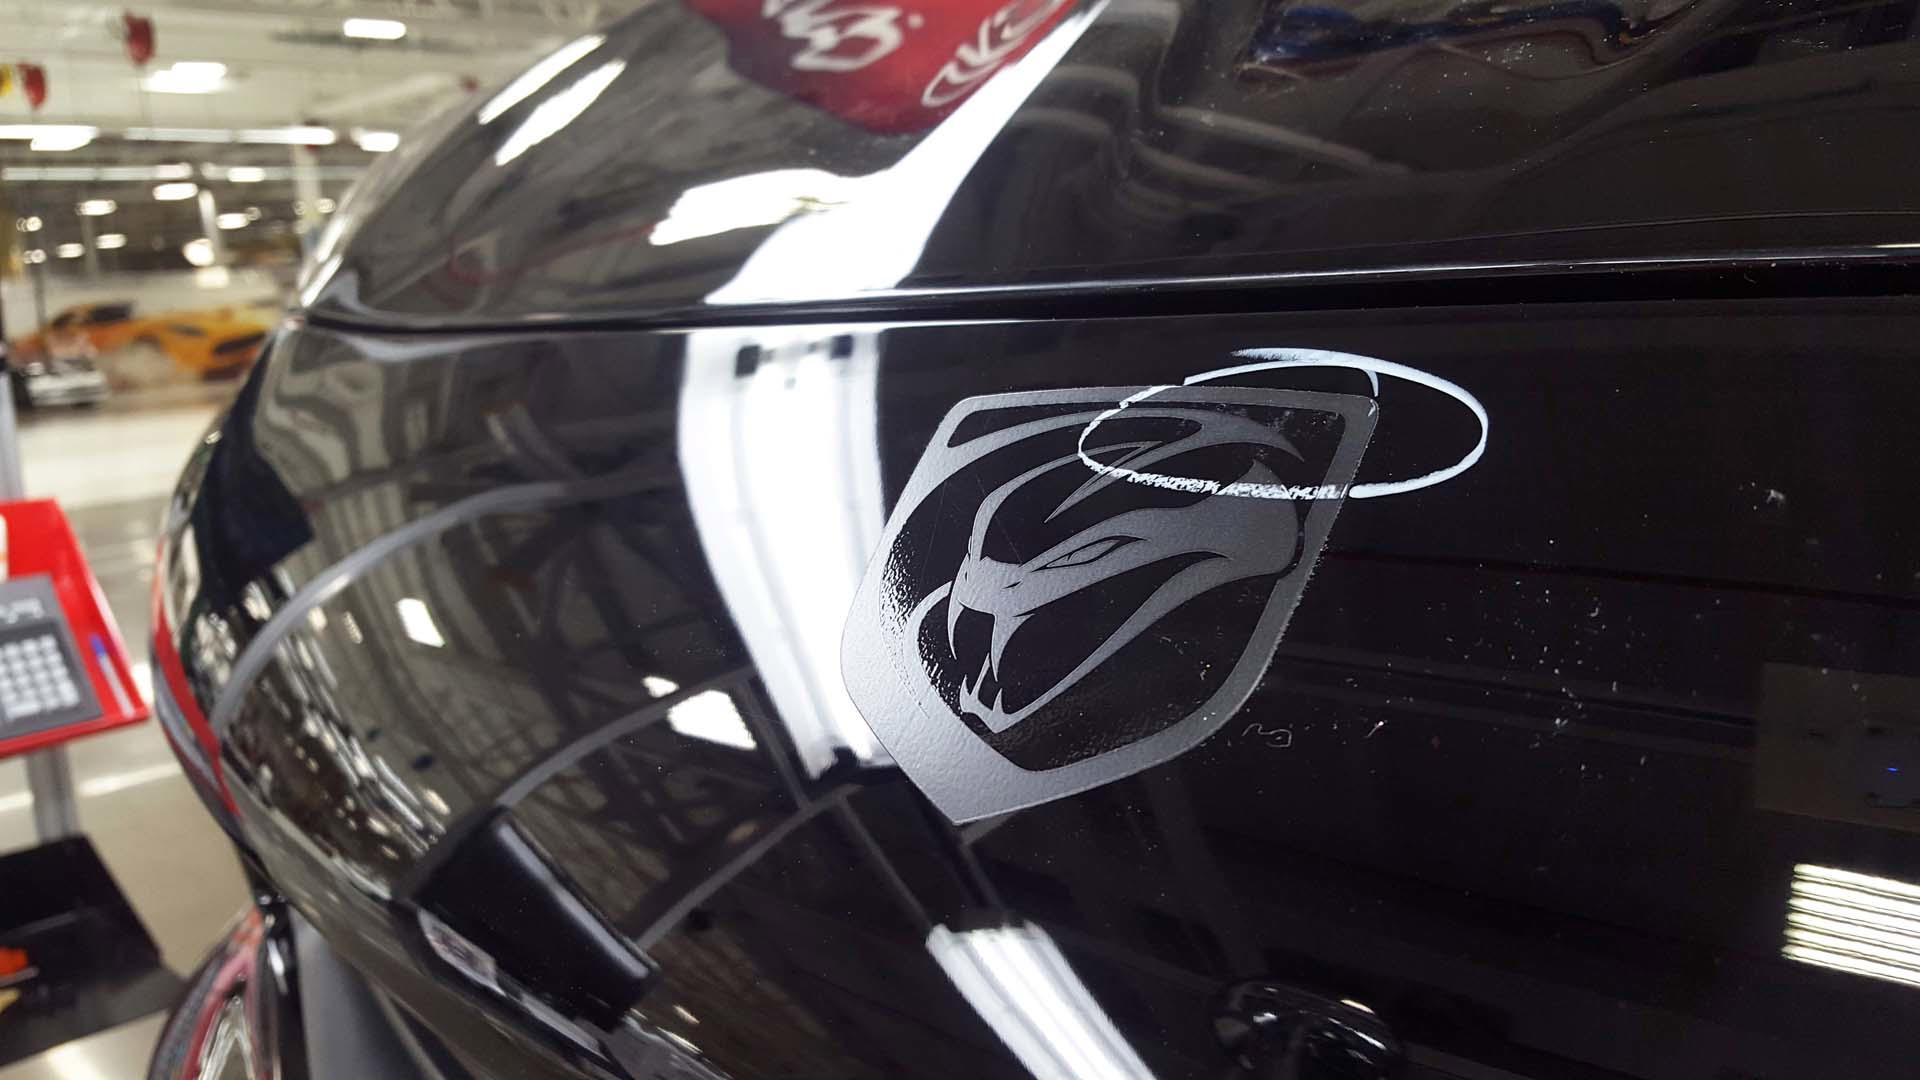 Anthony Thomas spotted a flaw. Circled with his wax crayon is a small imperfection in the lightweight sticker-badge on the front of this customer’s new Viper ACR. No matter how small, pride in their work means Viper’s creators do things right – including having this sticker removed and replaced.